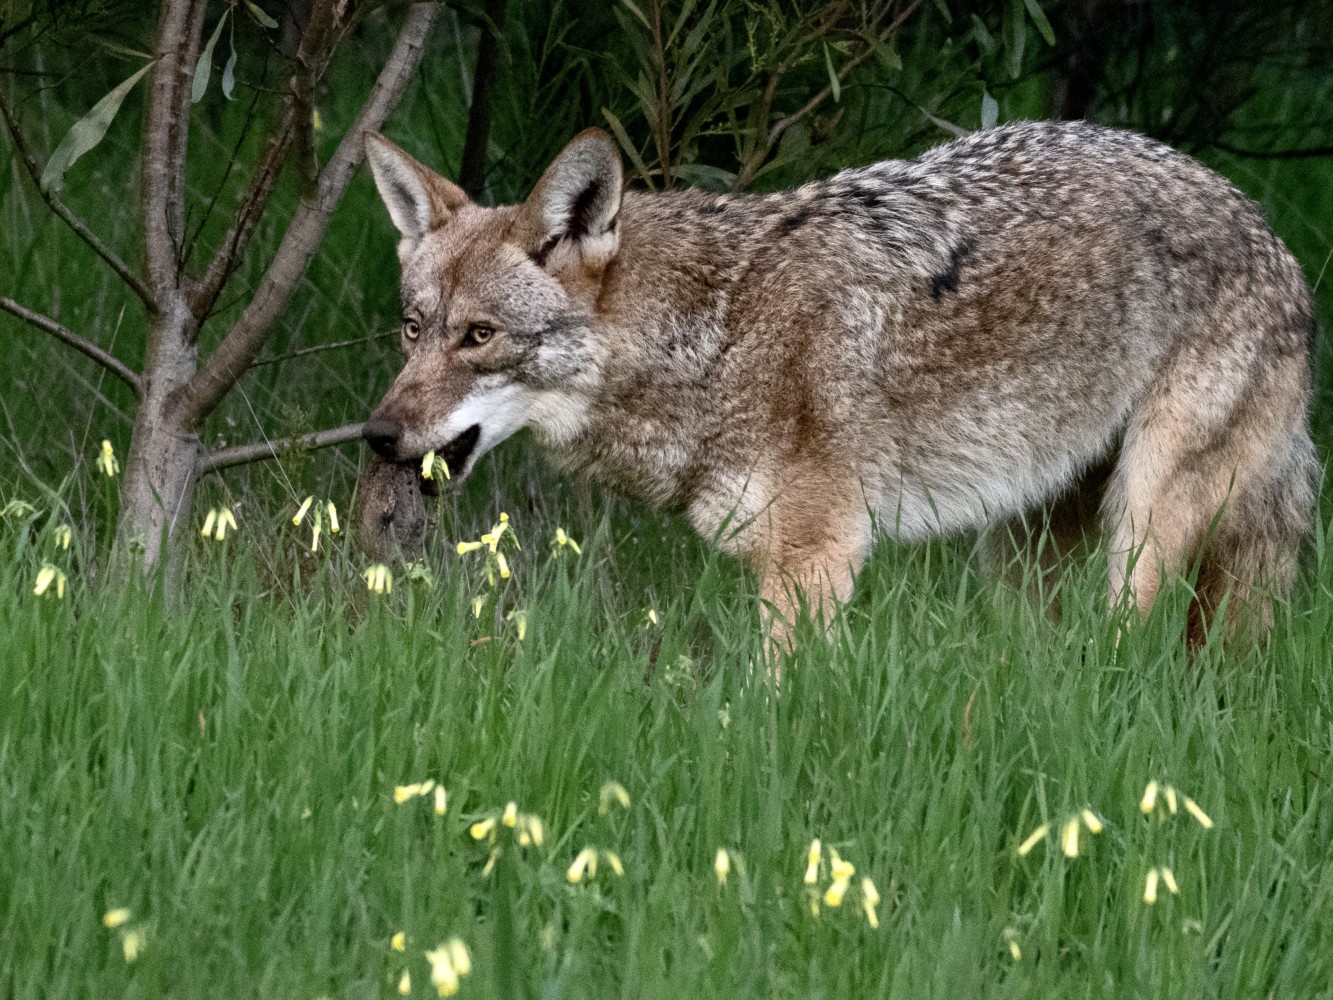 Coyote catching gopher in San Francisco Presidio